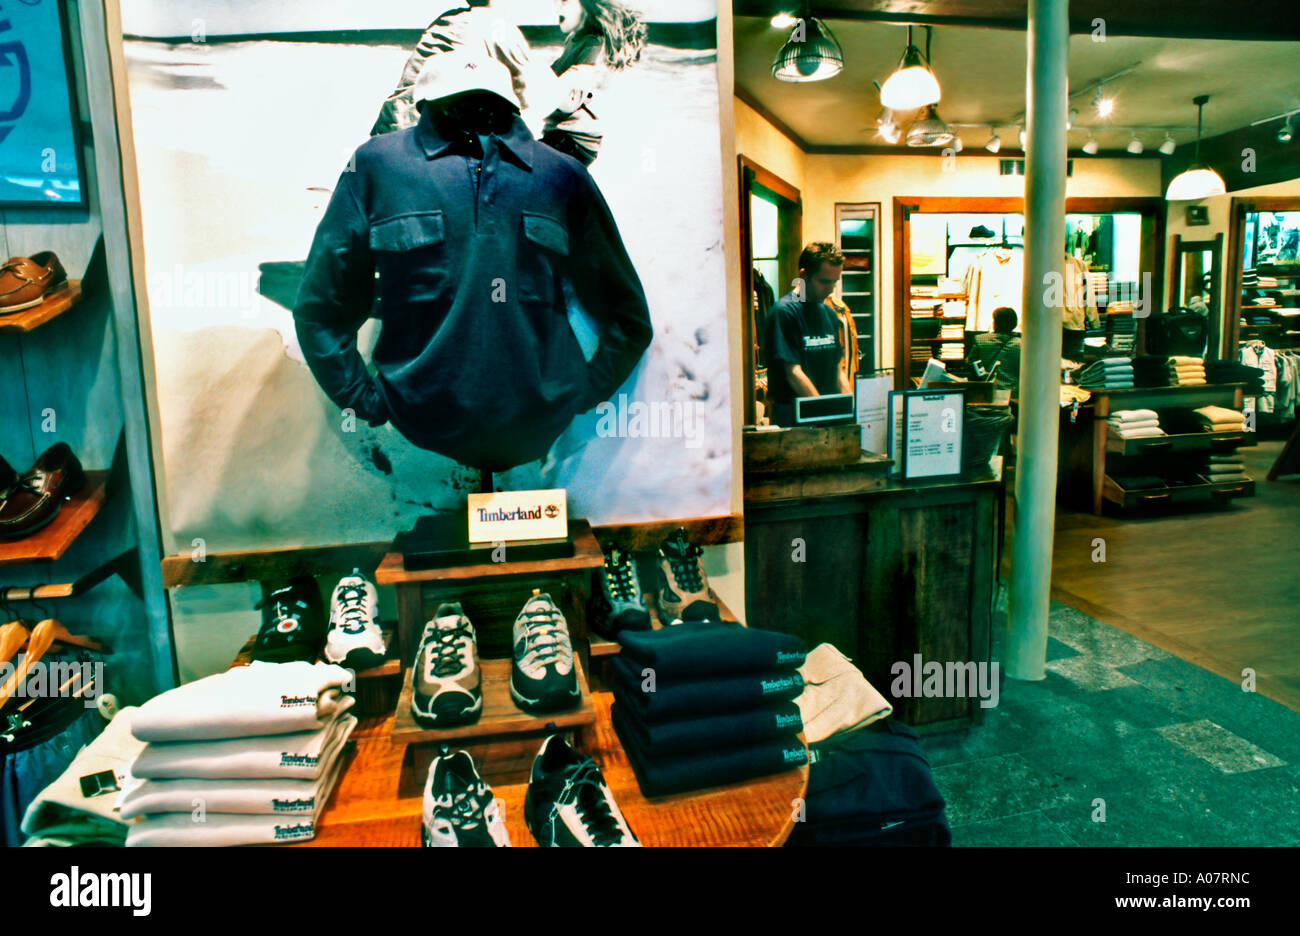 Paris France, Shopping Interior Sports Store Timberland, Shoes, Inside  Clothing Display Stock Photo - Alamy